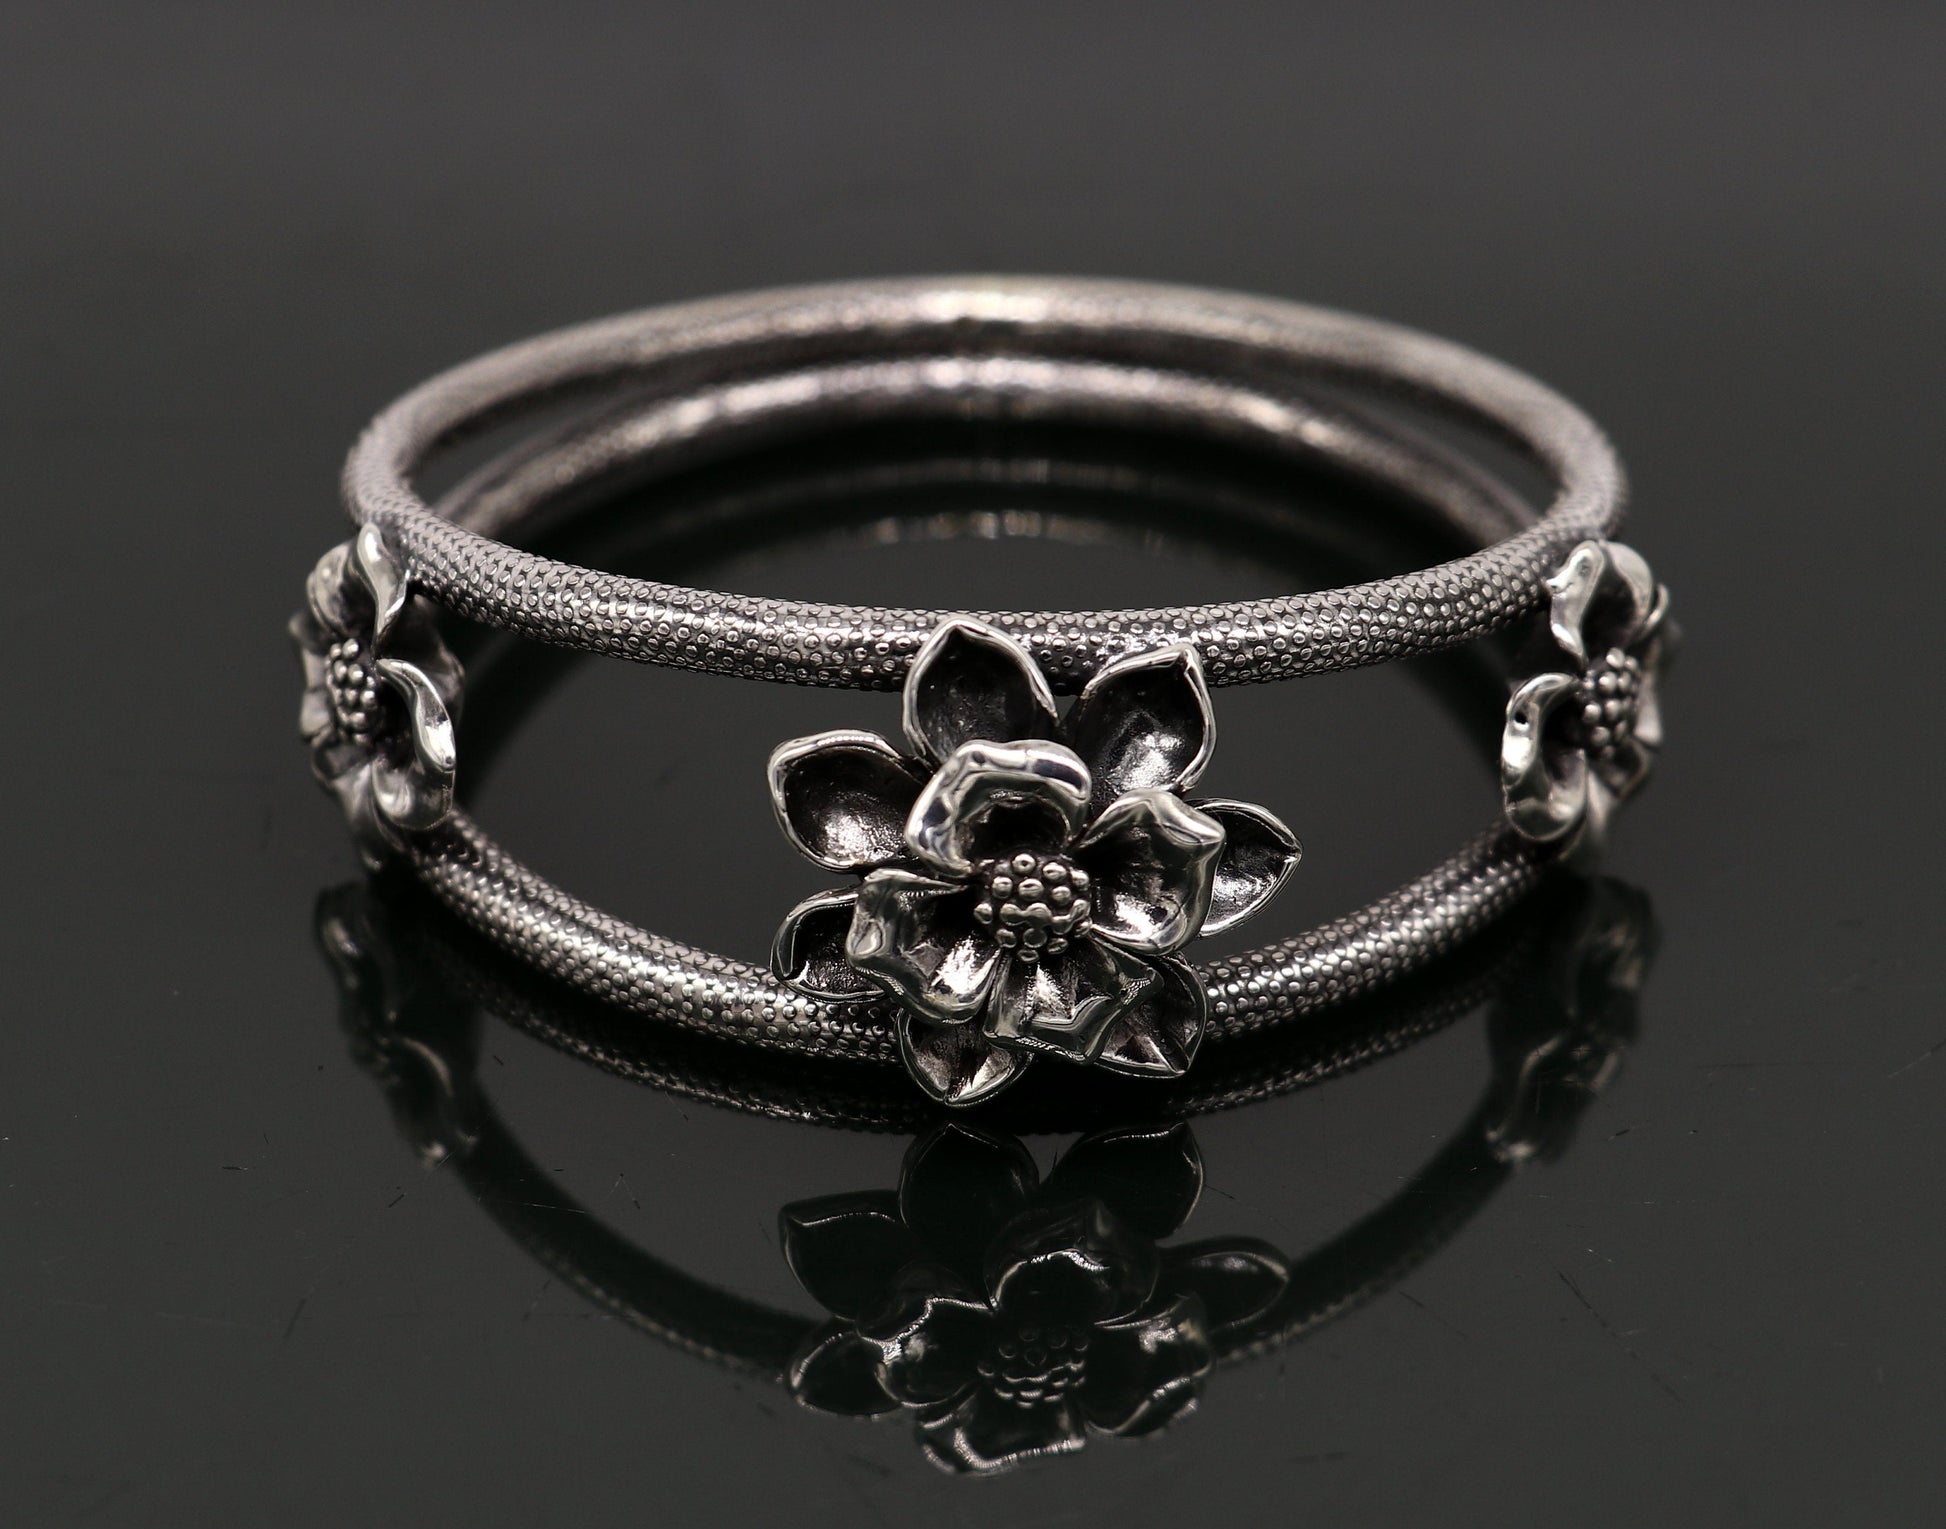 925 sterling silver handmade fabulous flower work vintage design bangle bracelet, excellent traditional style wedding jewelry nba157 - TRIBAL ORNAMENTS